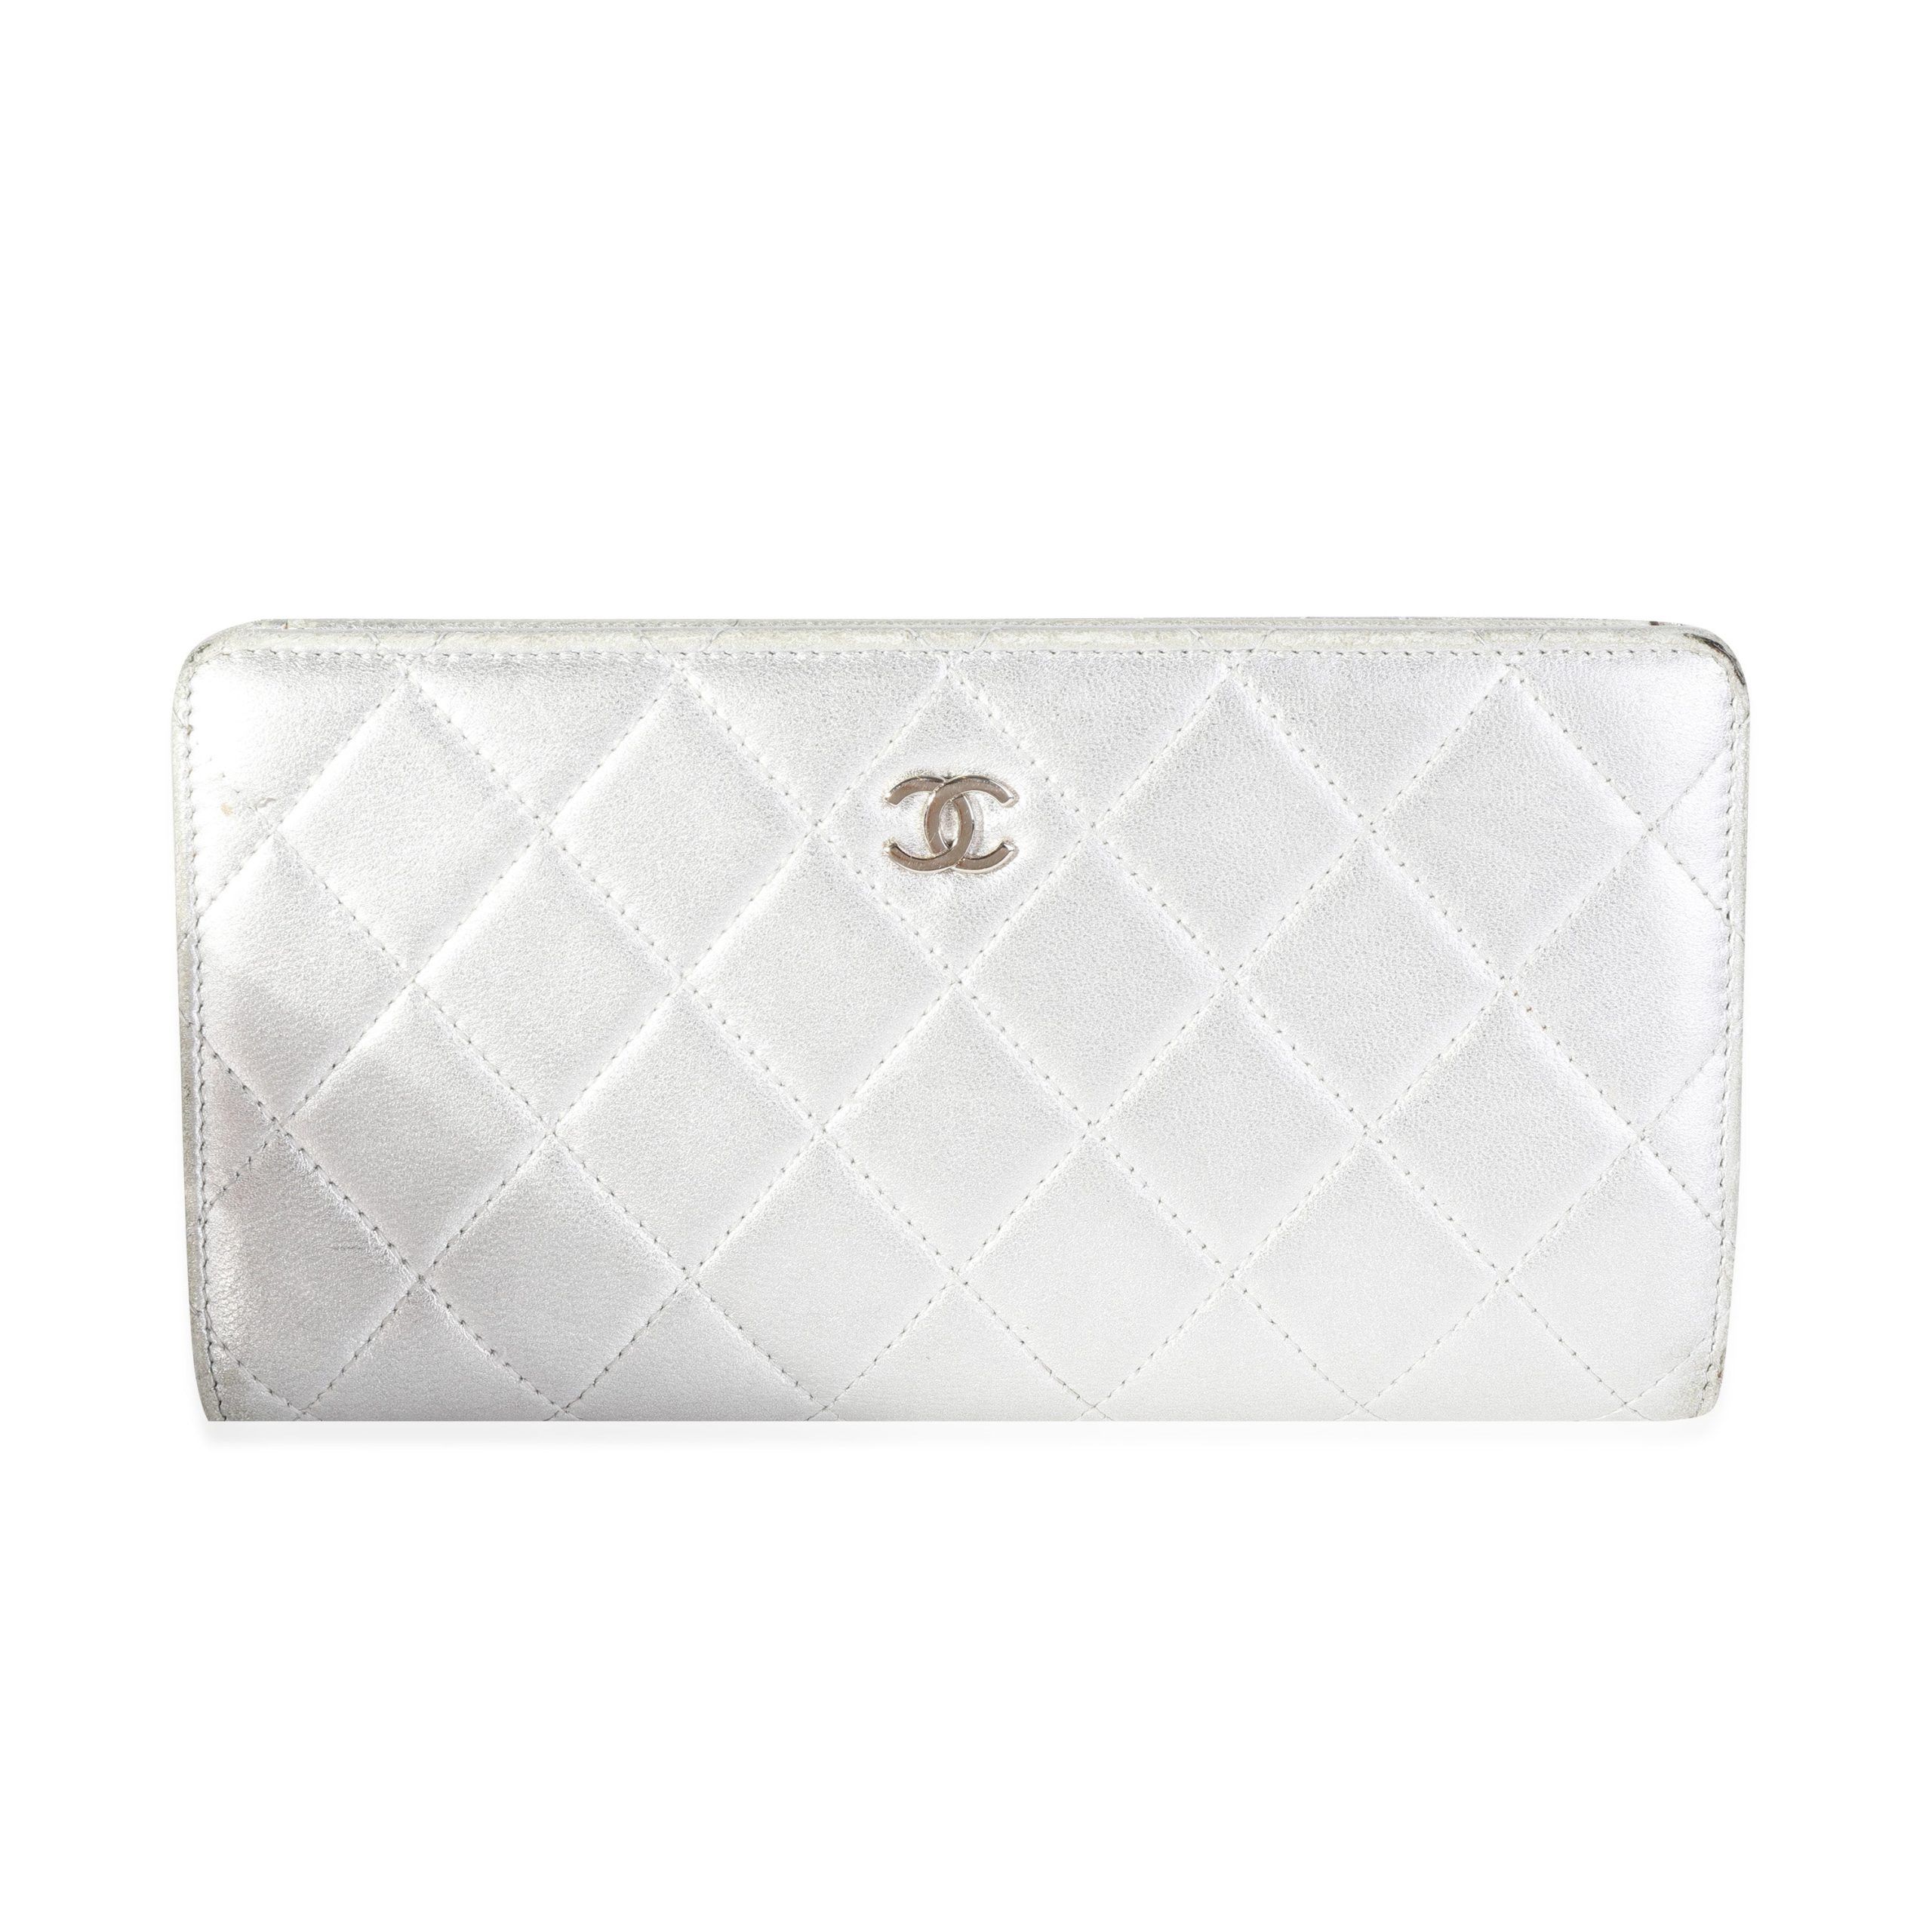 Chanel Chanel Metallic Silver Quilted Lambskin Leather CC L-Yen Wallet Size ONE SIZE - 1 Preview